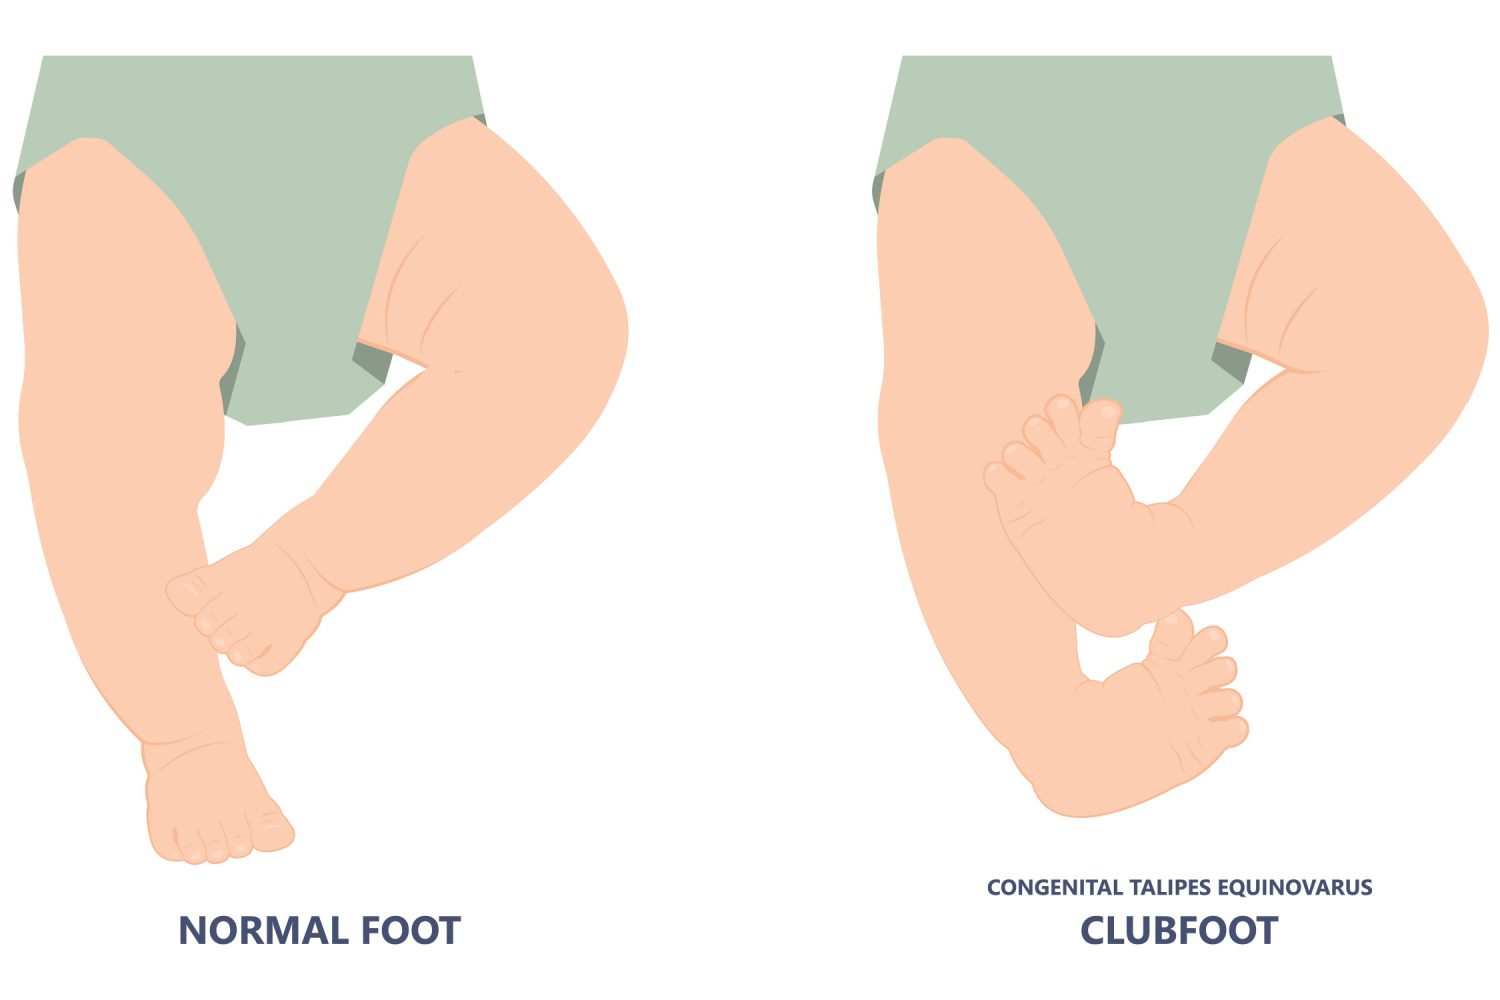 Clubfeet in kids is a sign of dwarfism